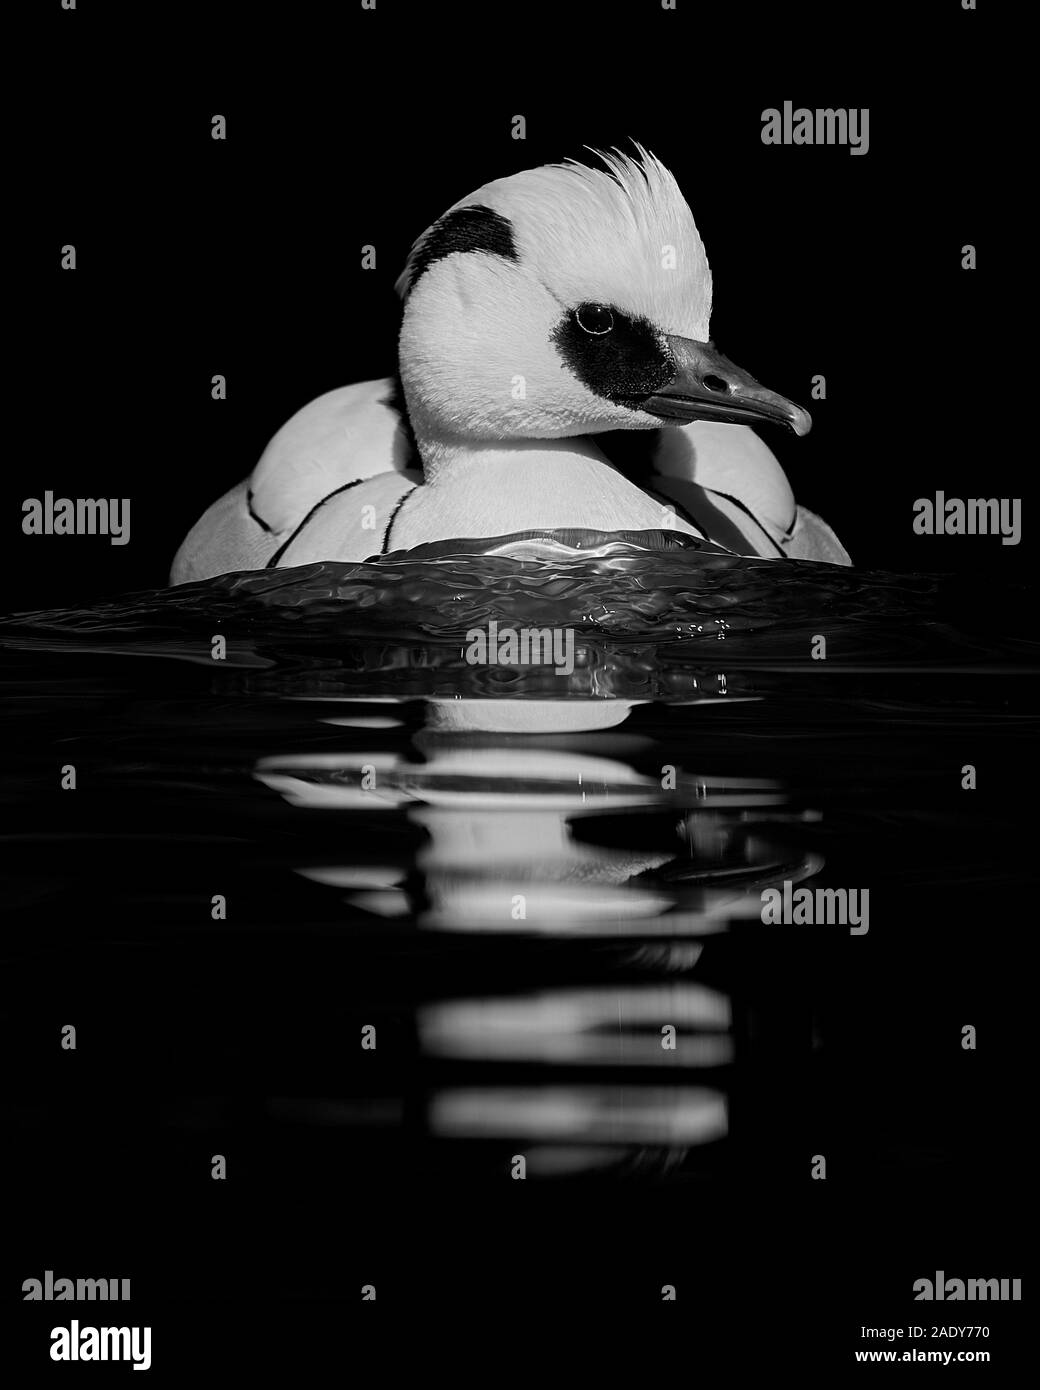 Smew Floating in Water Against a Black Background Stock Photo